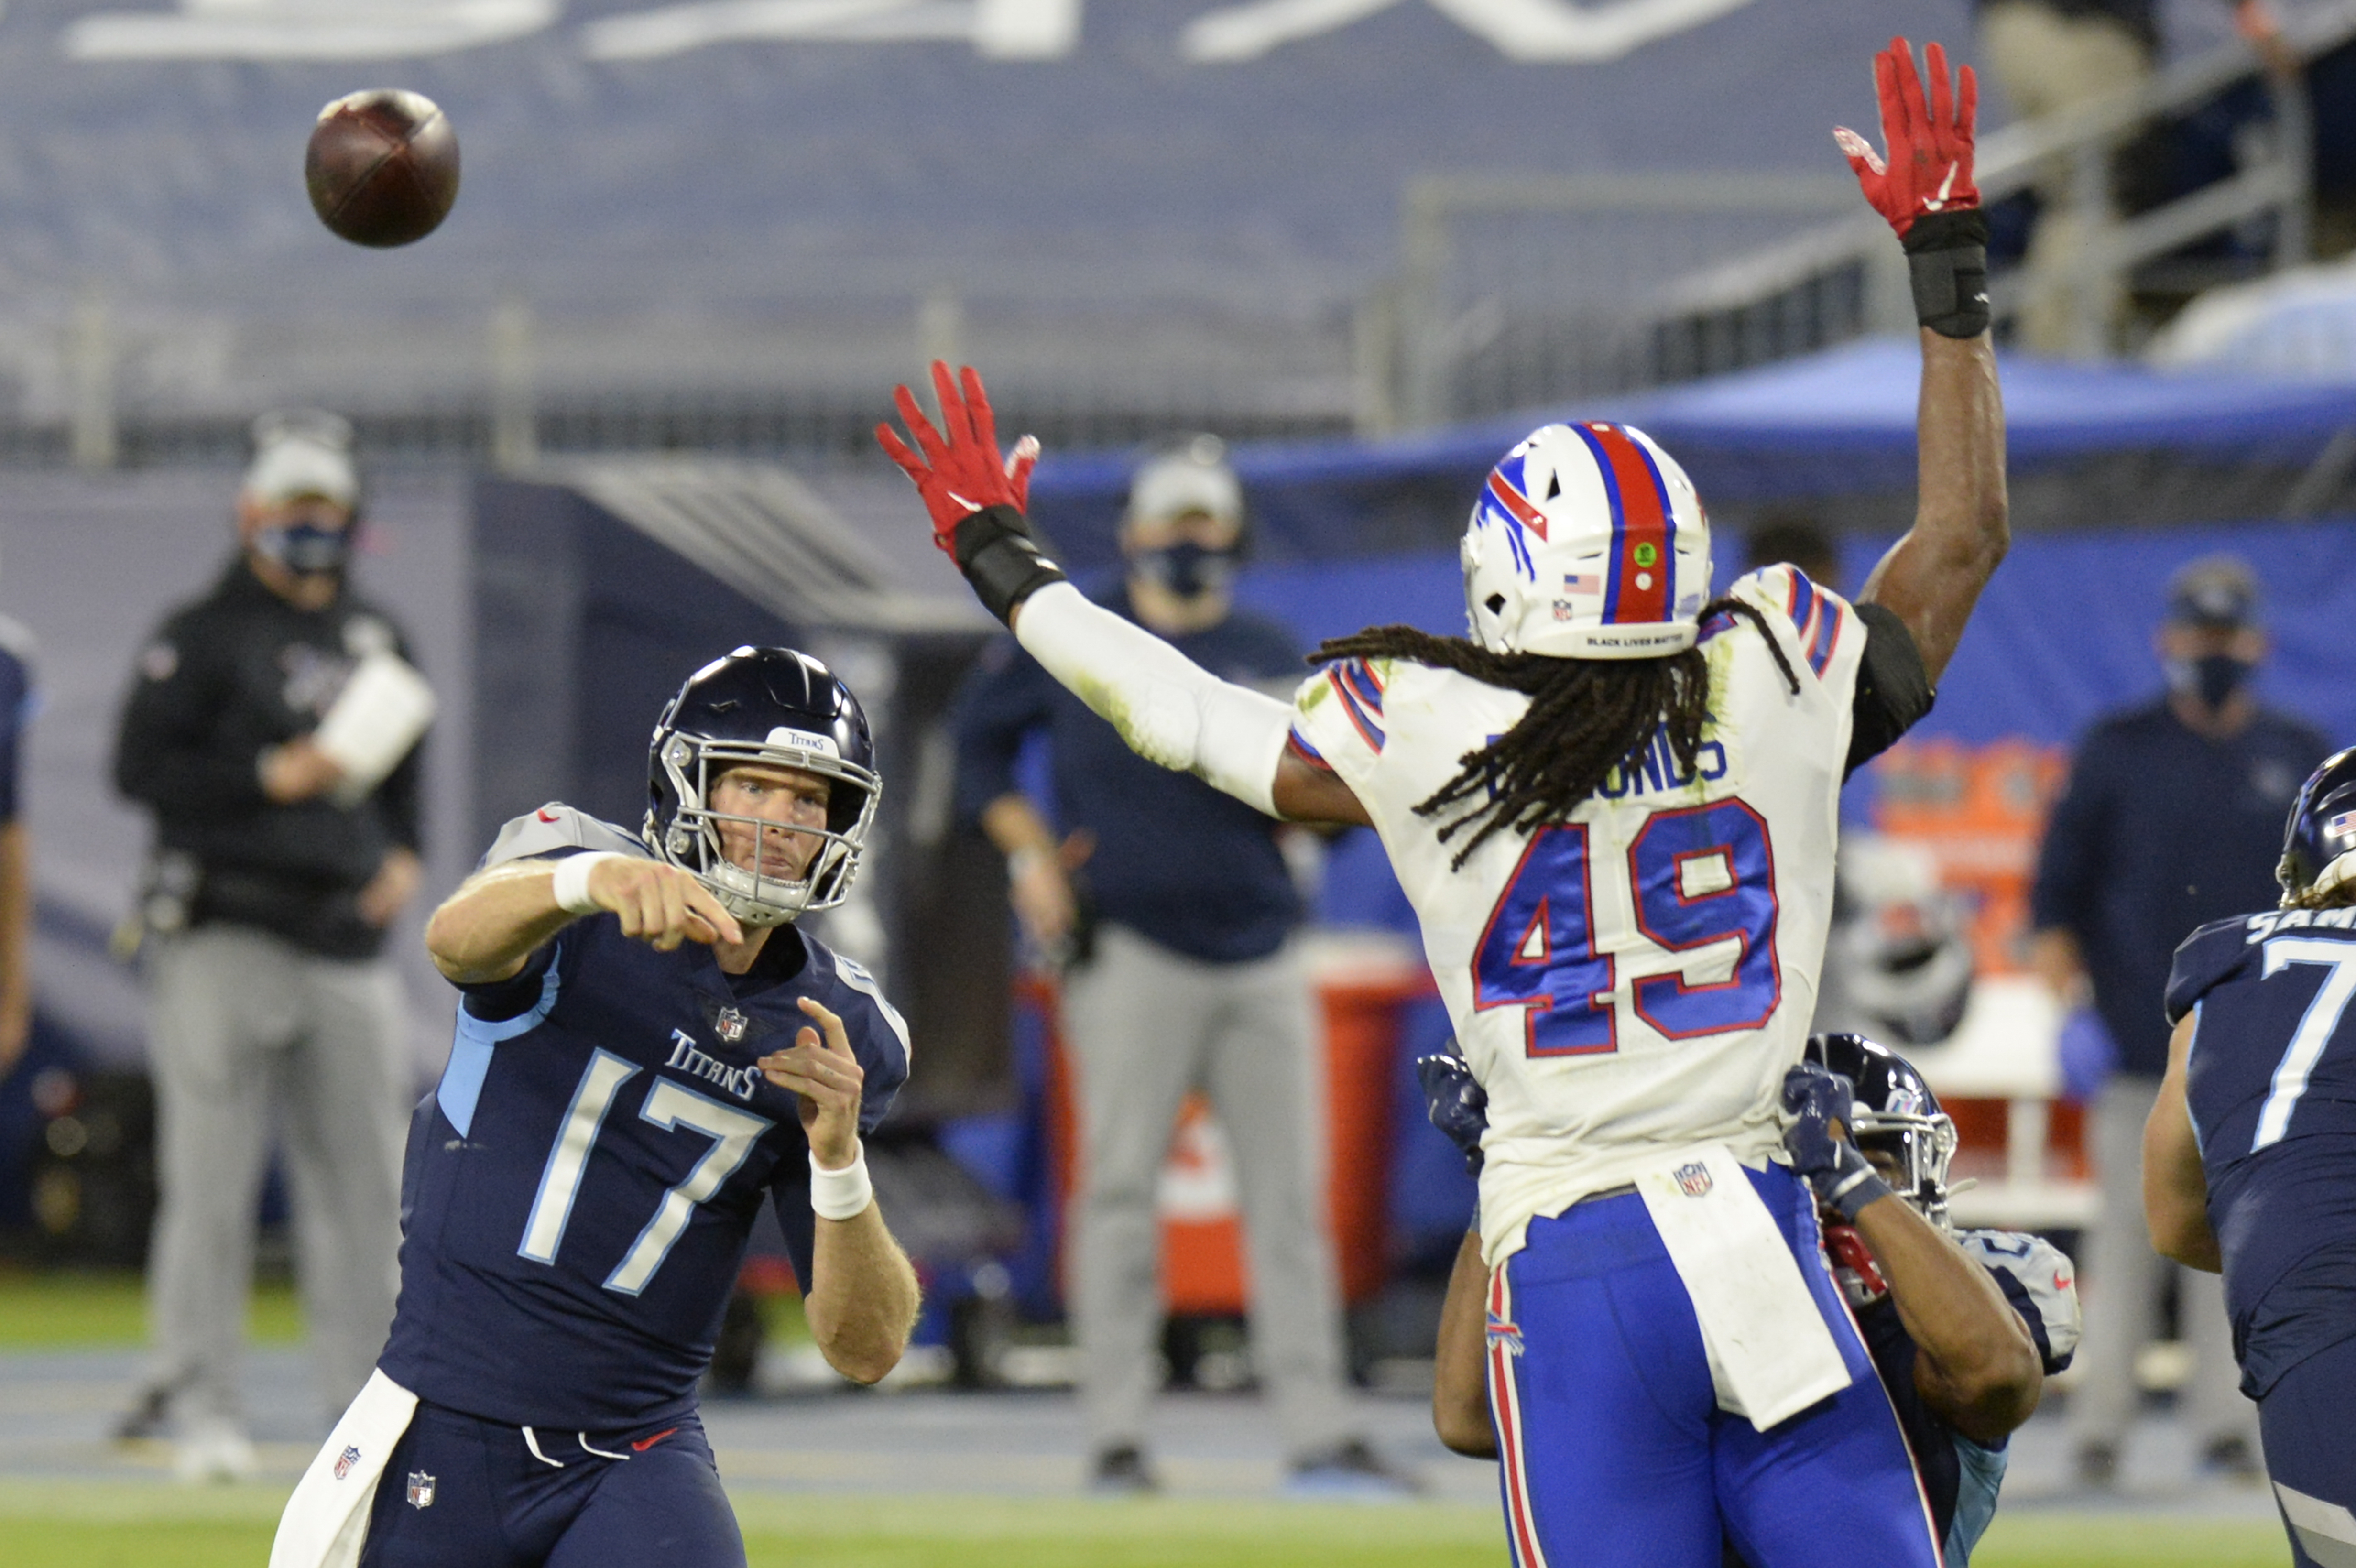 Social media reacts to Bills' thumping of Titans